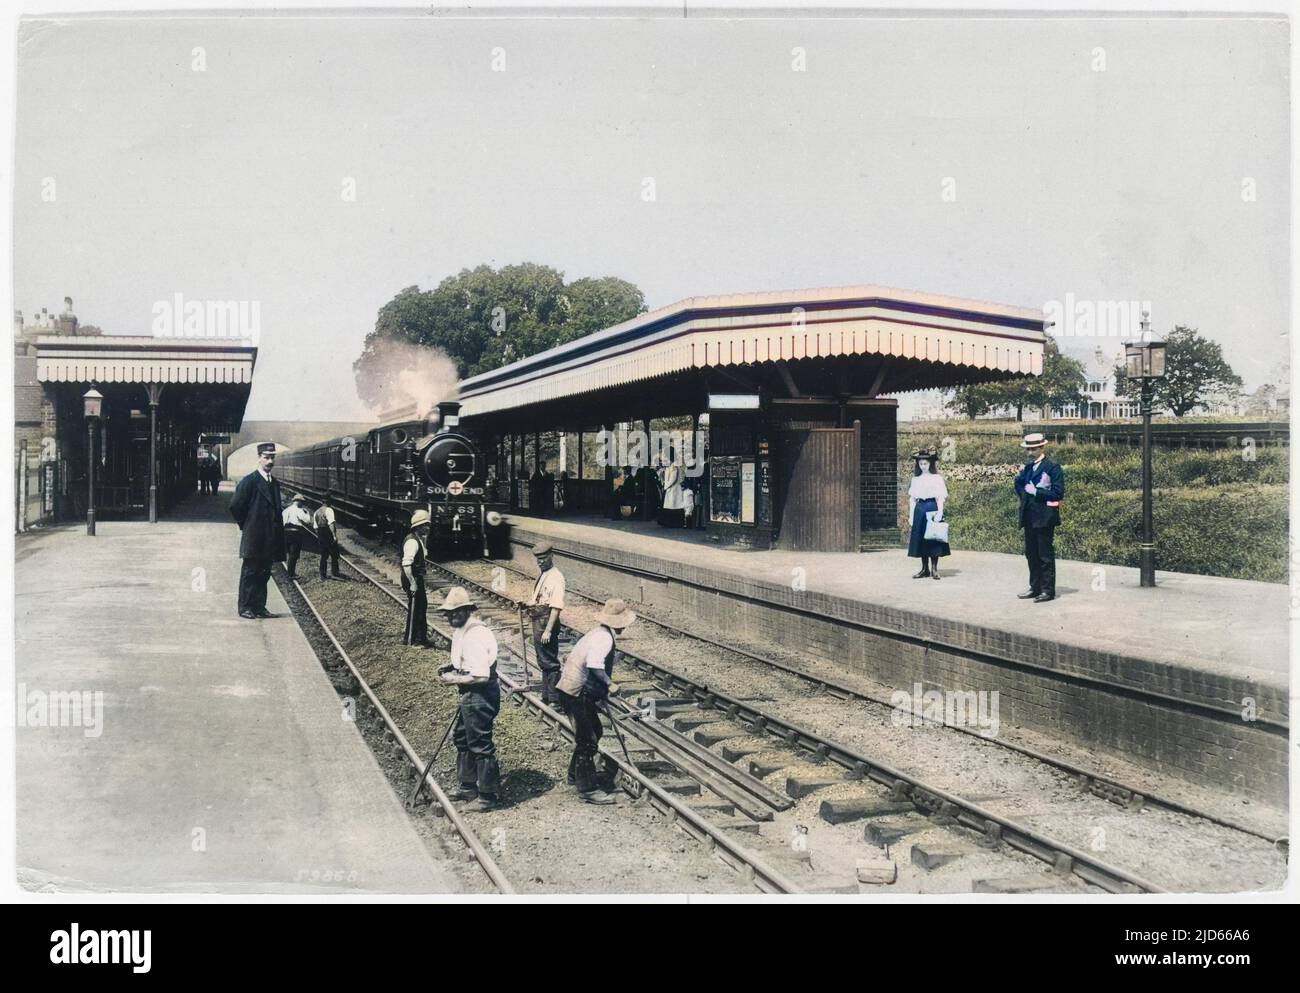 Navvies at work on the line at Upminster Station in the London Borough of Havering, Greater London, not far from the border with Essex. Two passengers wait on the far platform for their train to arrive. Colourised version of : 10006466       Date: 1908 Stock Photo